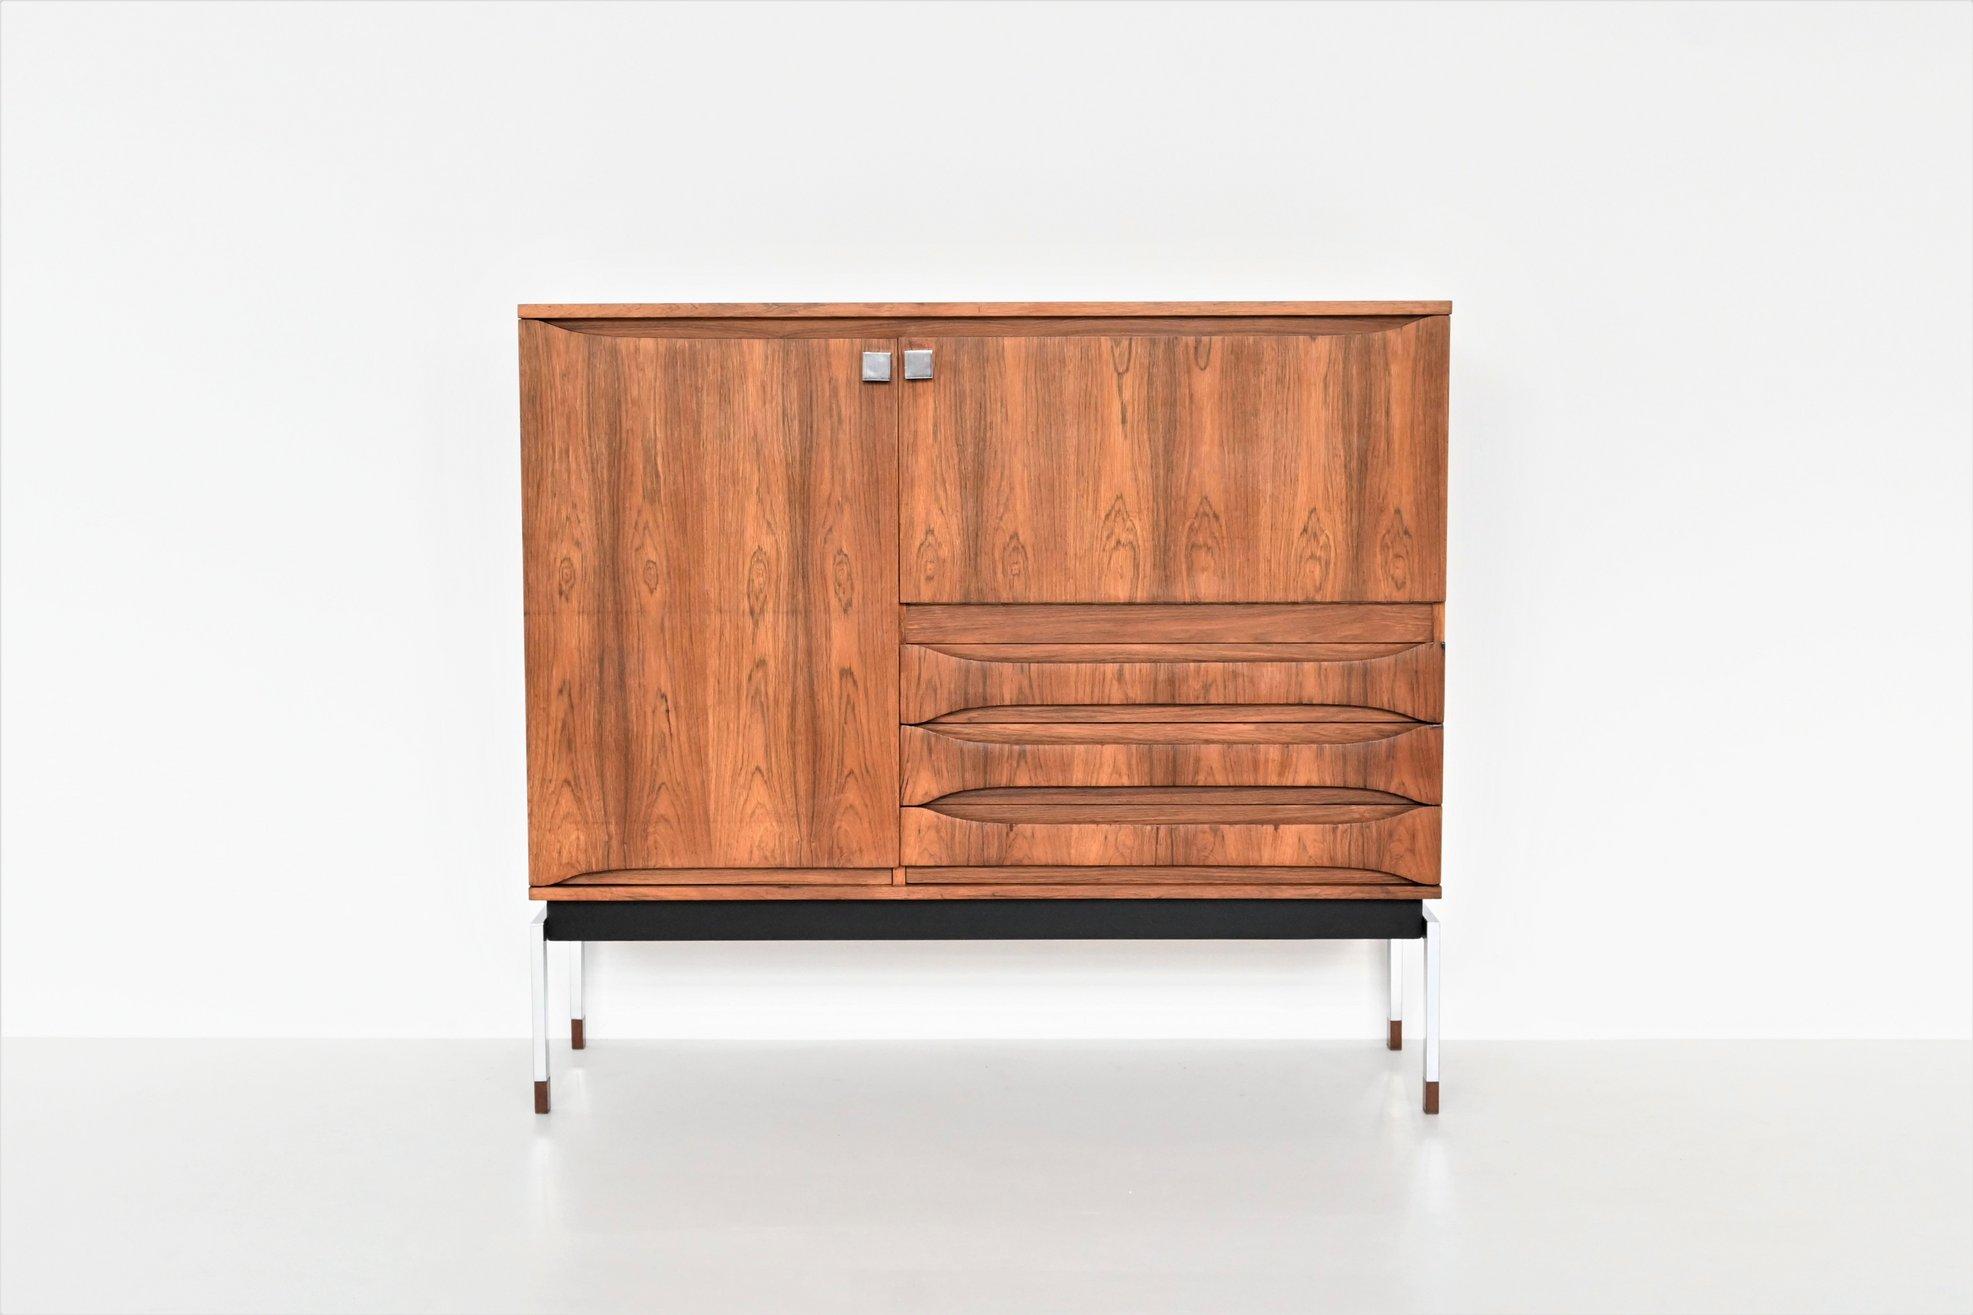 Beautiful high bar cabinet or buffet designed by Alfred Hendrickx and manufactured by Belform, Belgium 1960. This nicely refined cabinet is made of veneered rosewood supported by a brushed steel frame with wooden tips. It has an amazing flamed grain